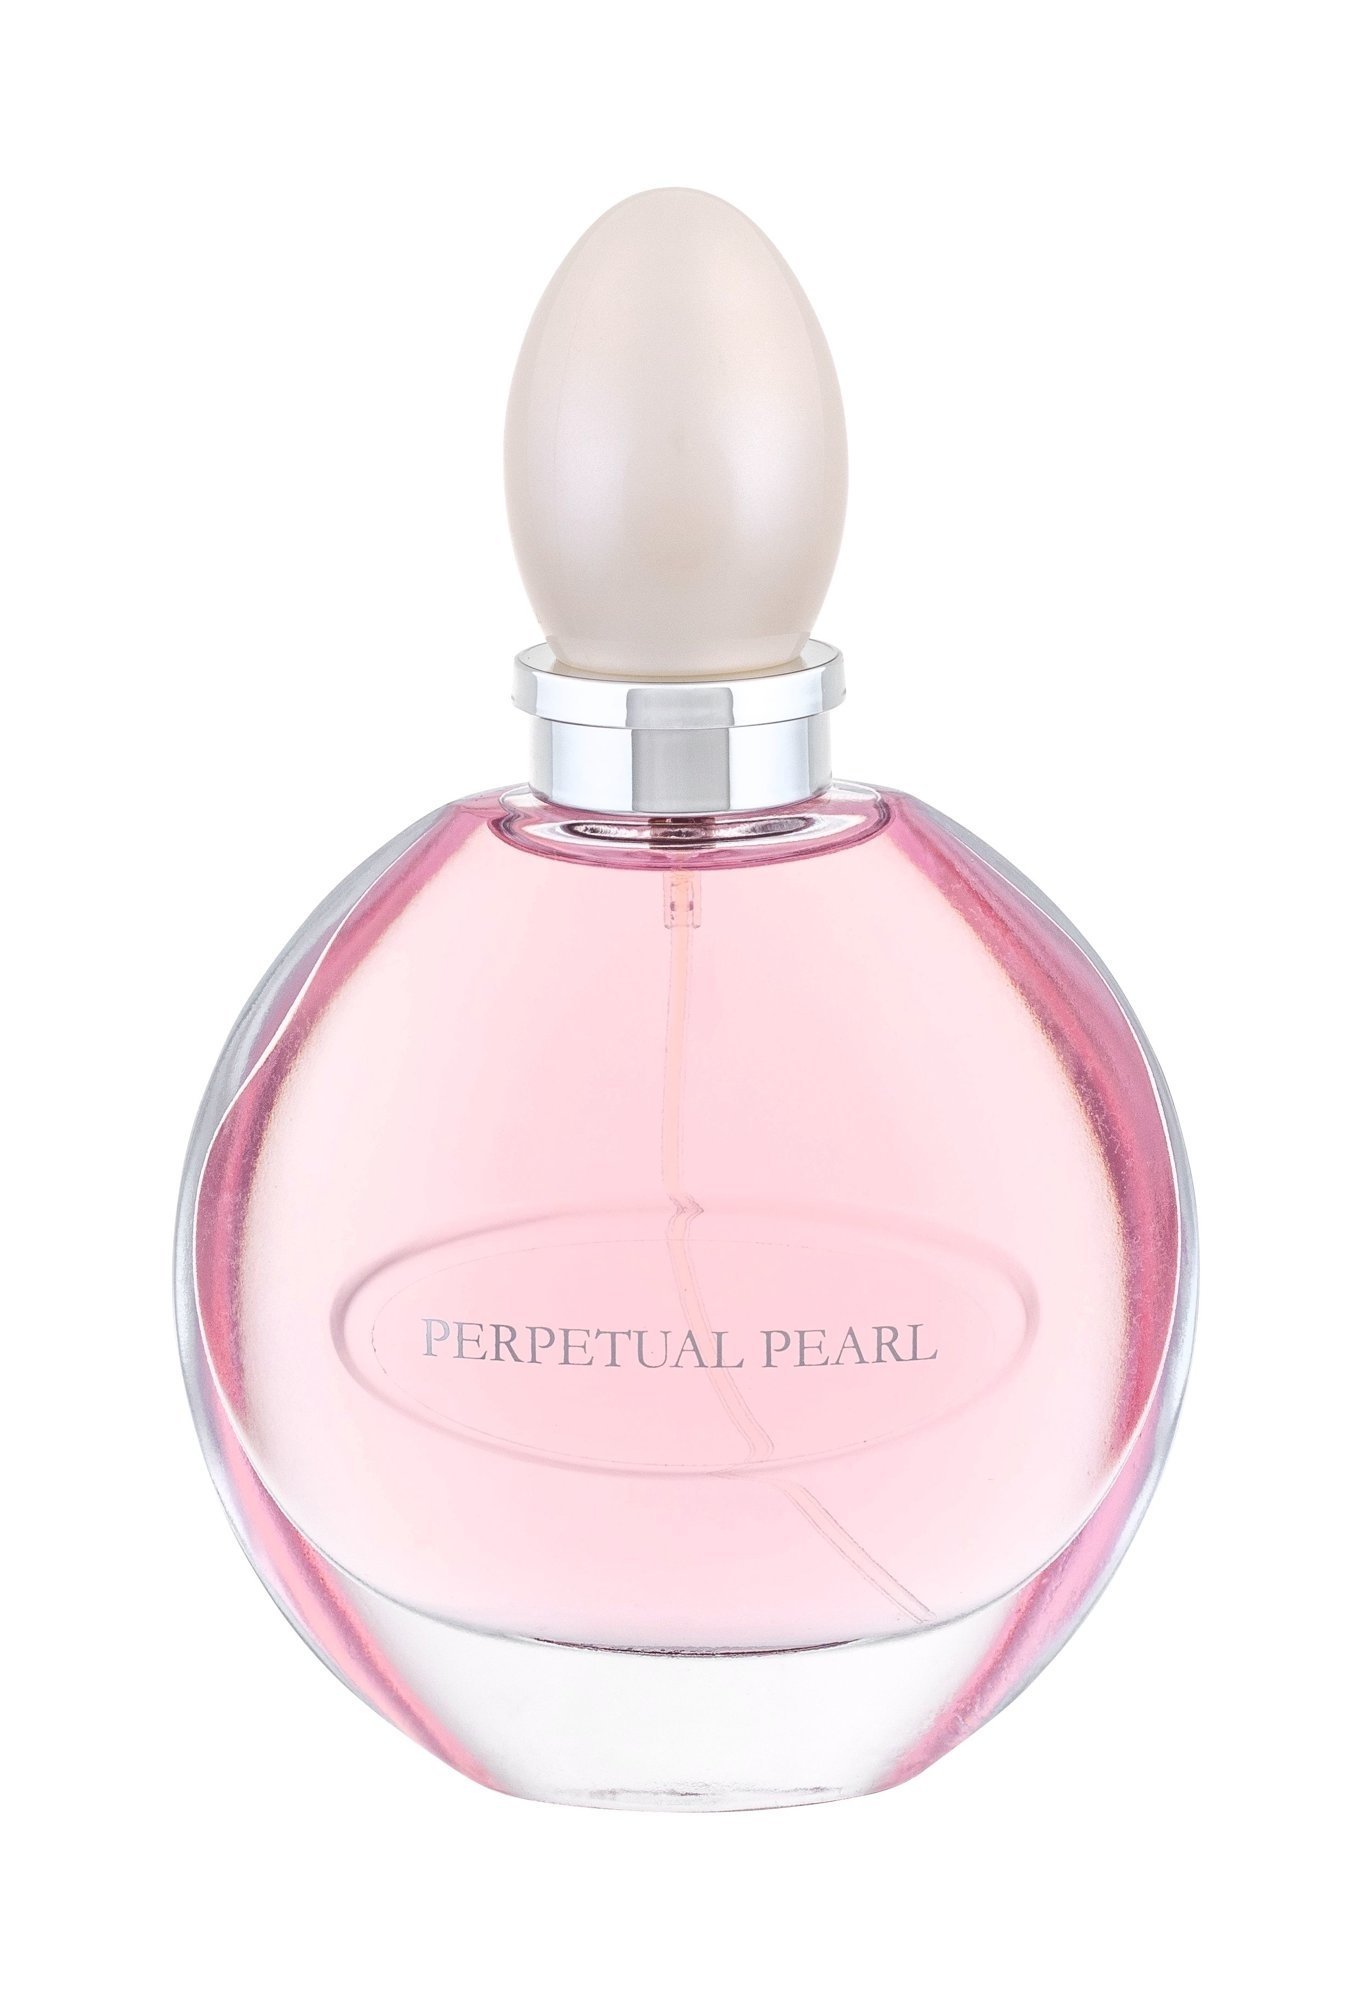 Духи pearl. Духи Jeanne Arthes. Jeanne Arthes Perpetual Silver Pearl 100мл ЦУМ. Pearl духи женские. White Pearl духи.